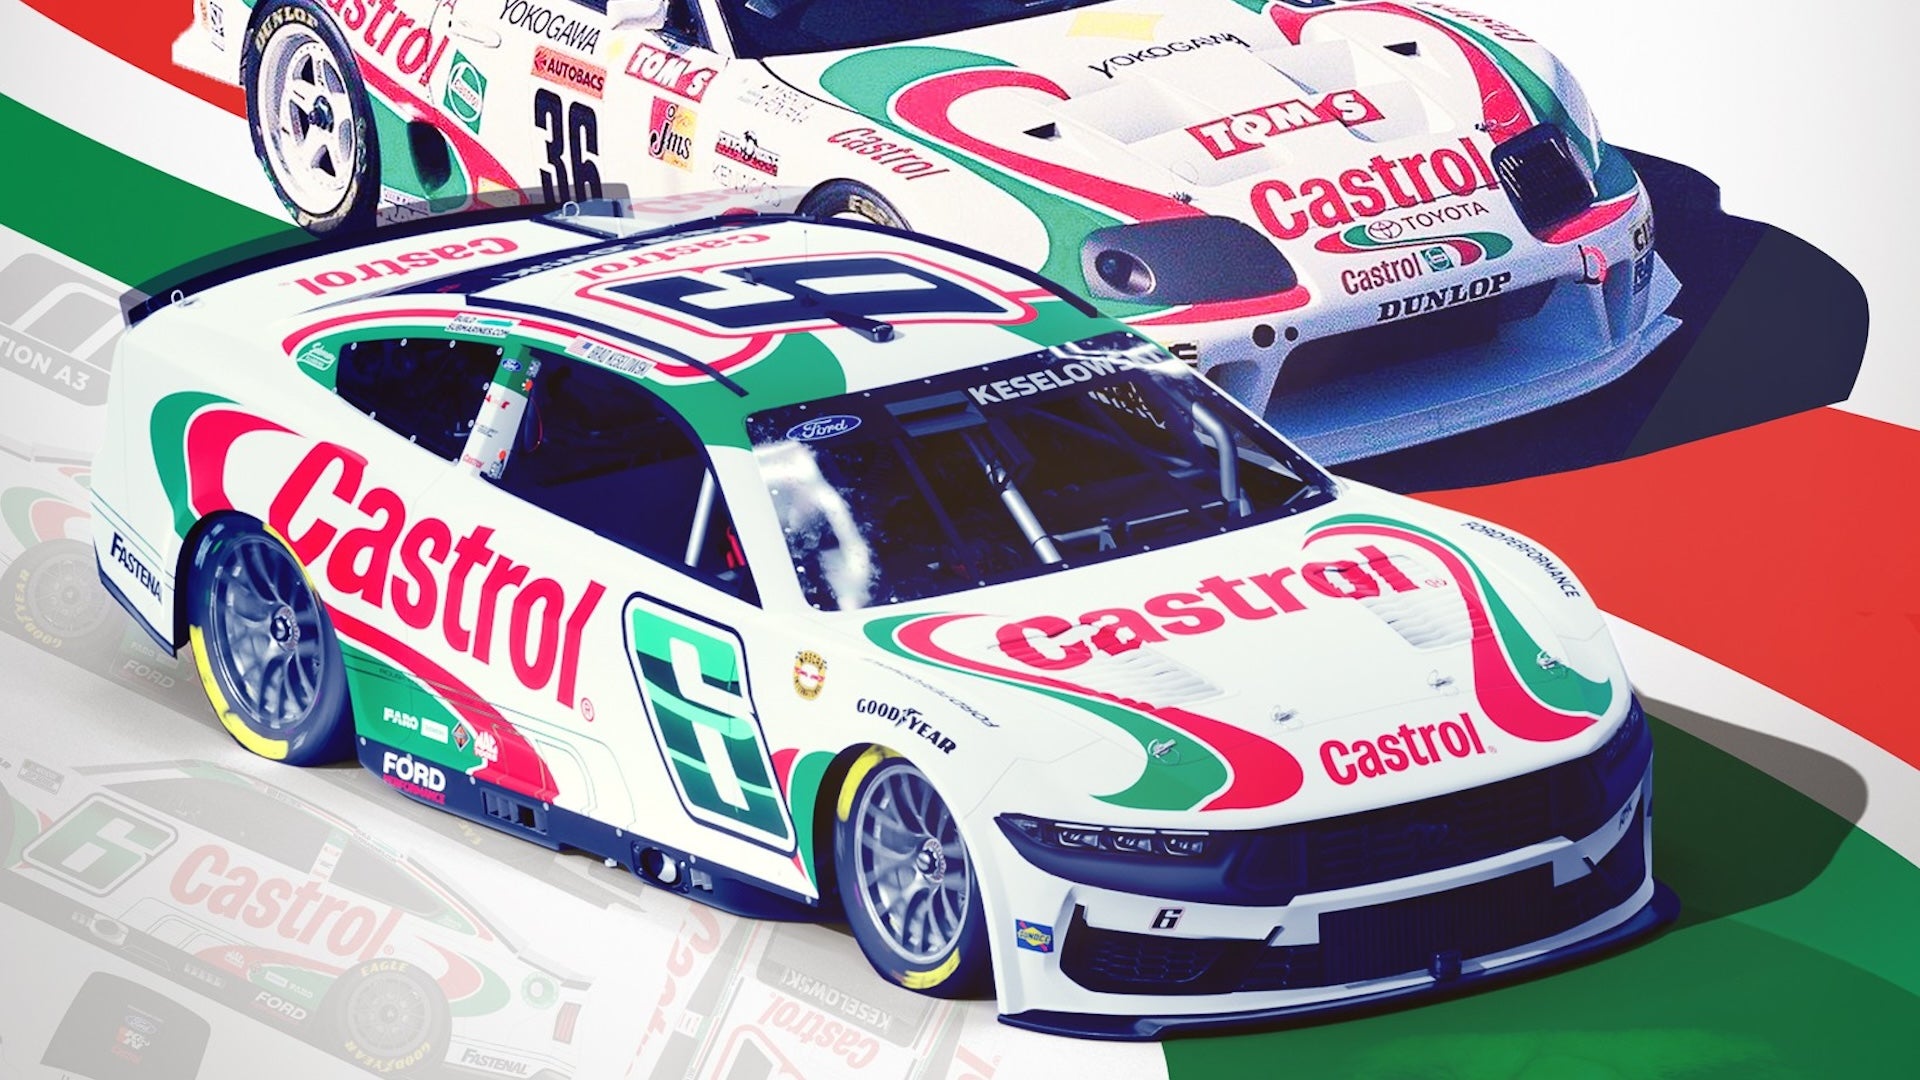 The NASCAR Mustang appears to have taken inspiration from Toyota’s Castrol TOM Supra livery.